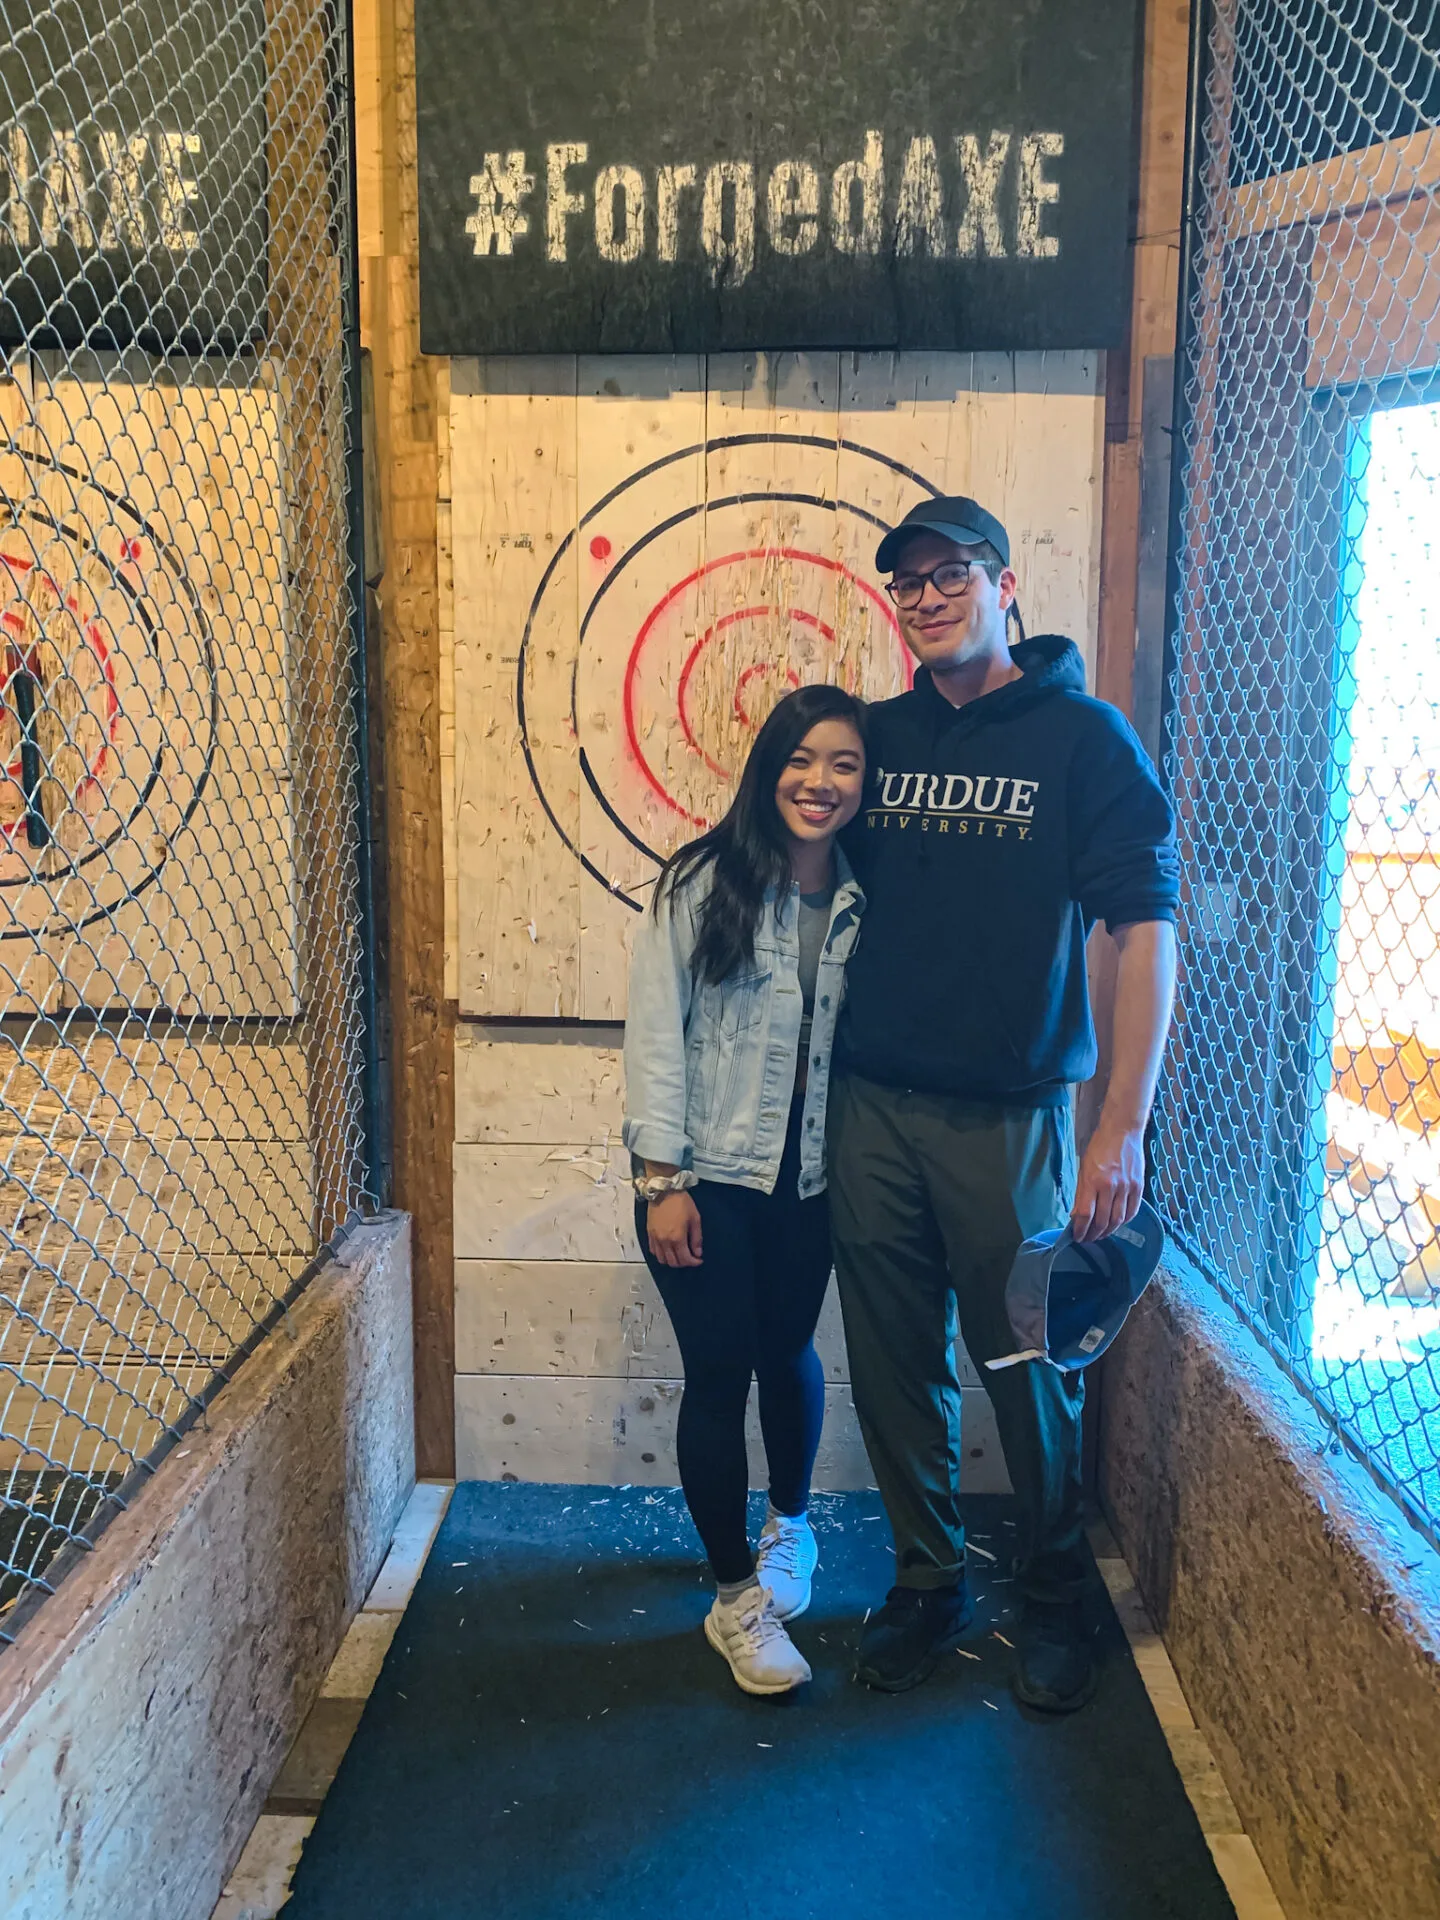 Forged Axe Throwing experience in Whistler, British Columbia